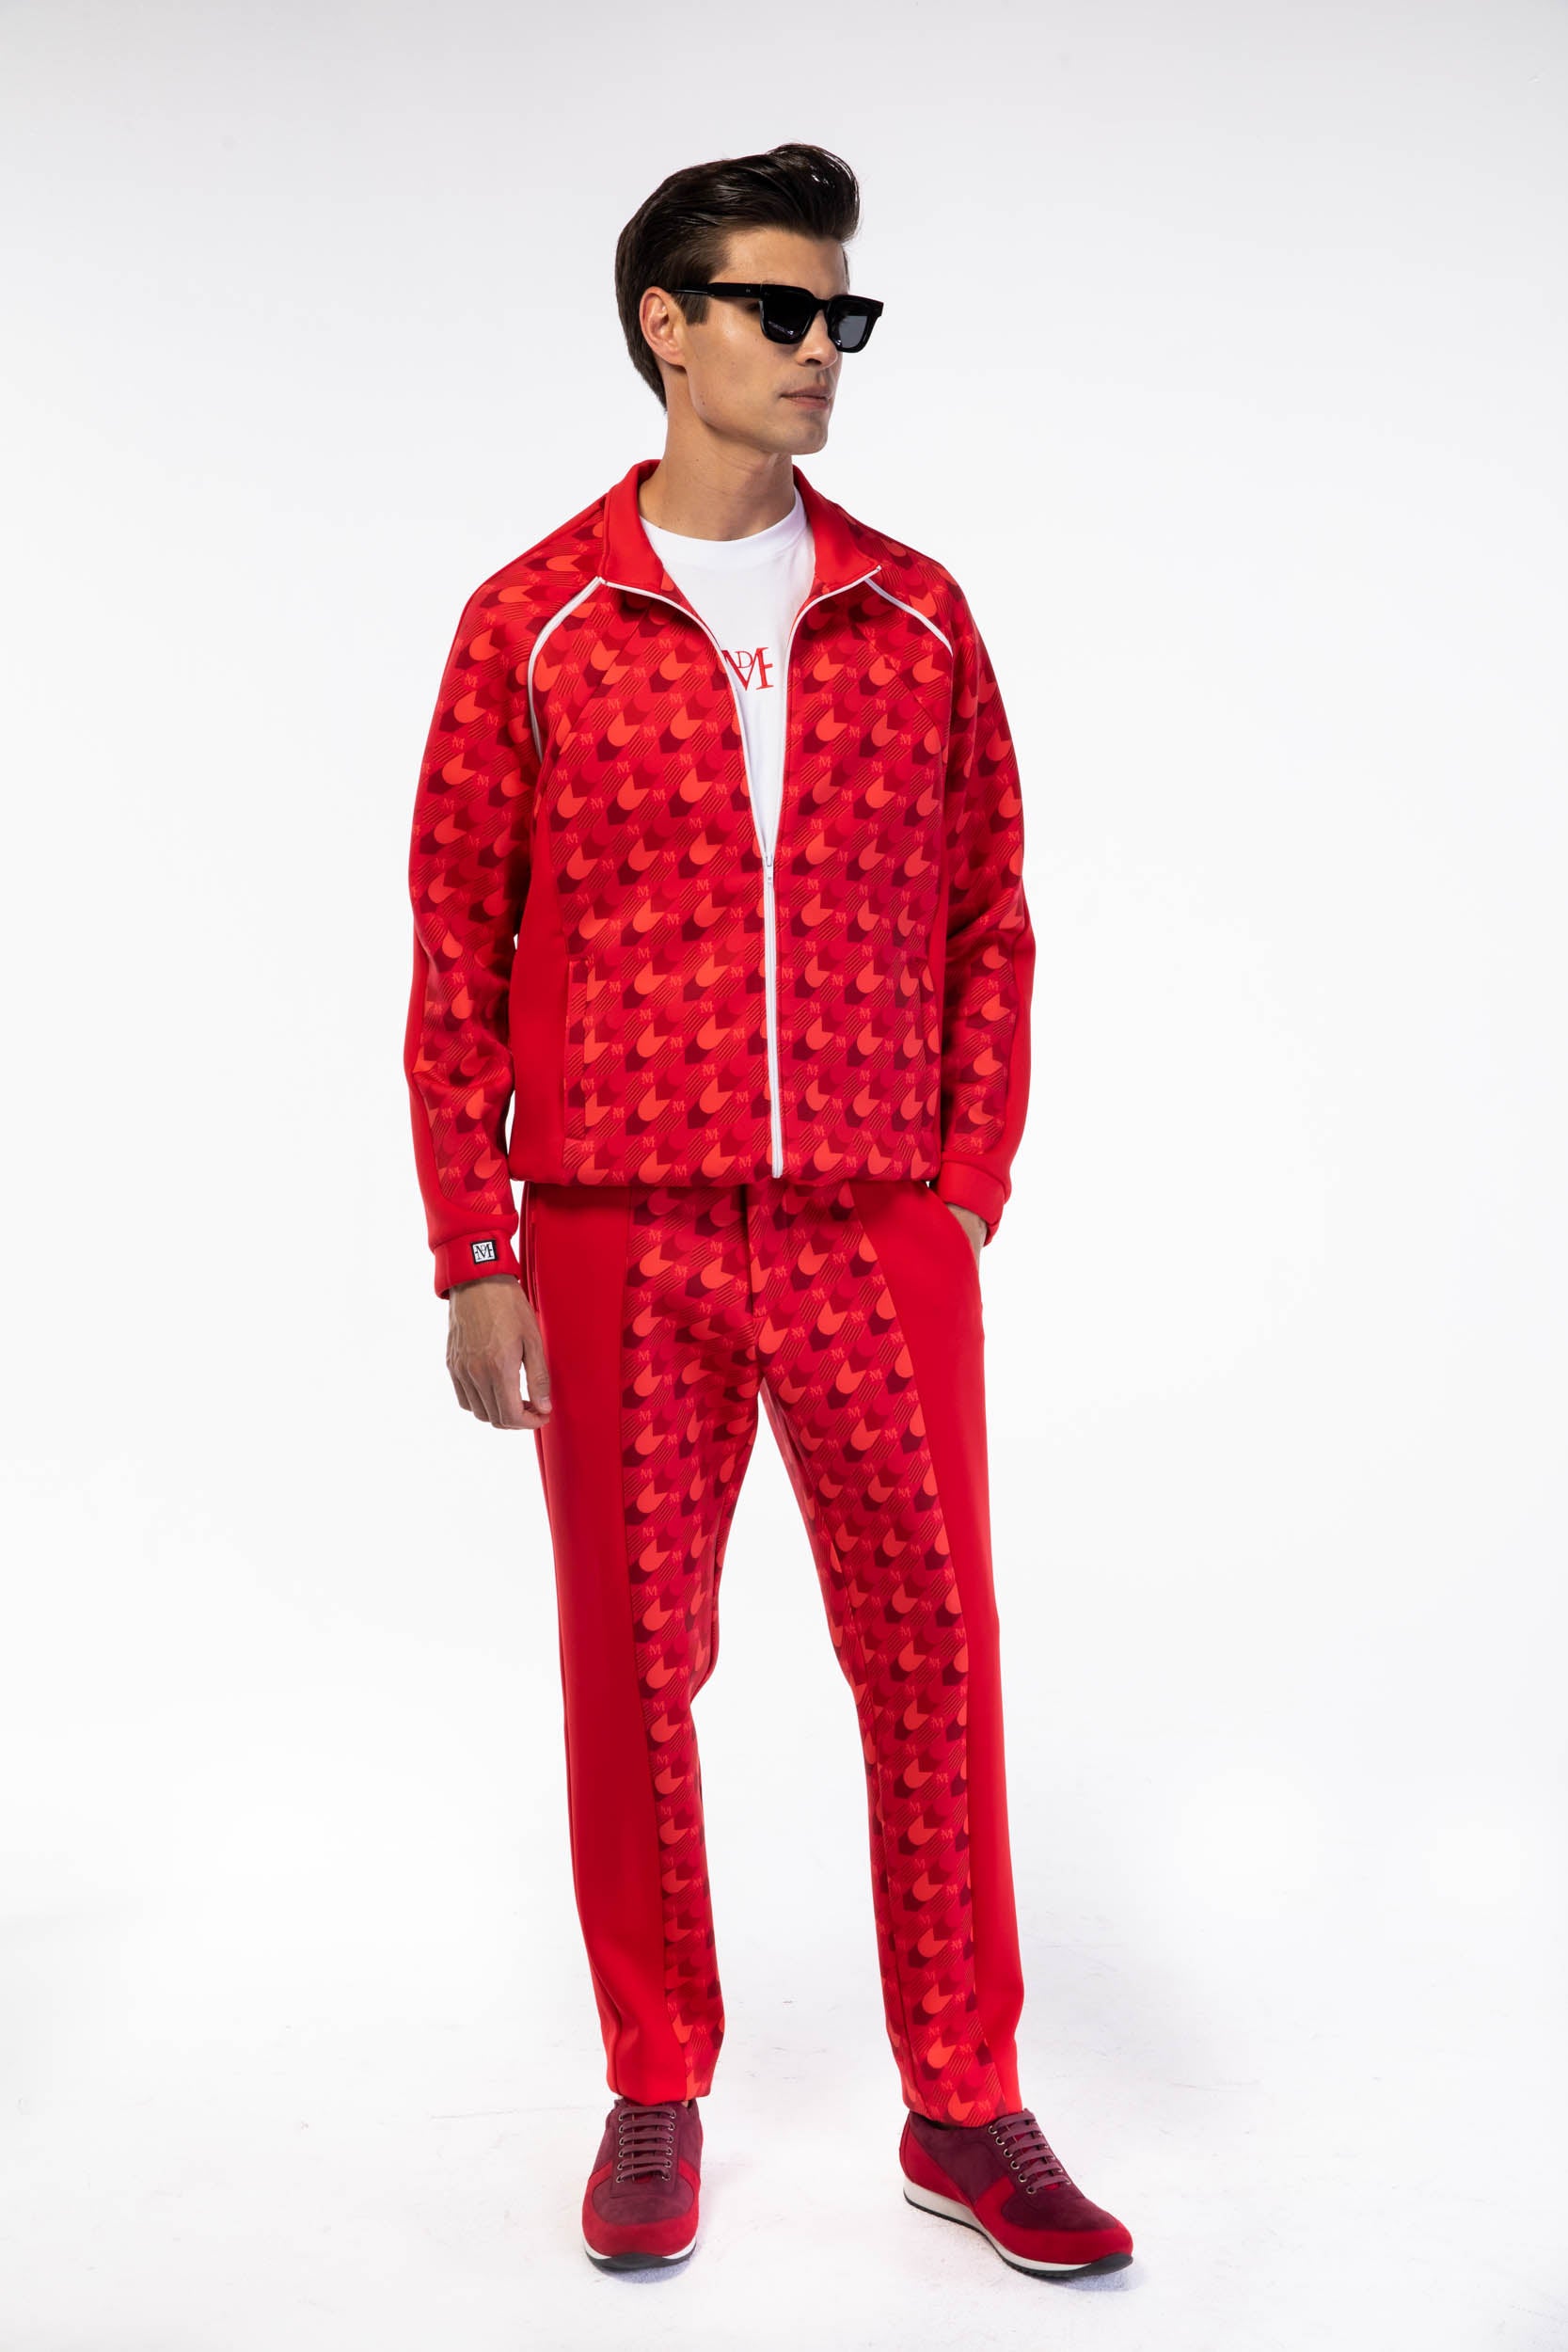 LV Red Sweatsuit